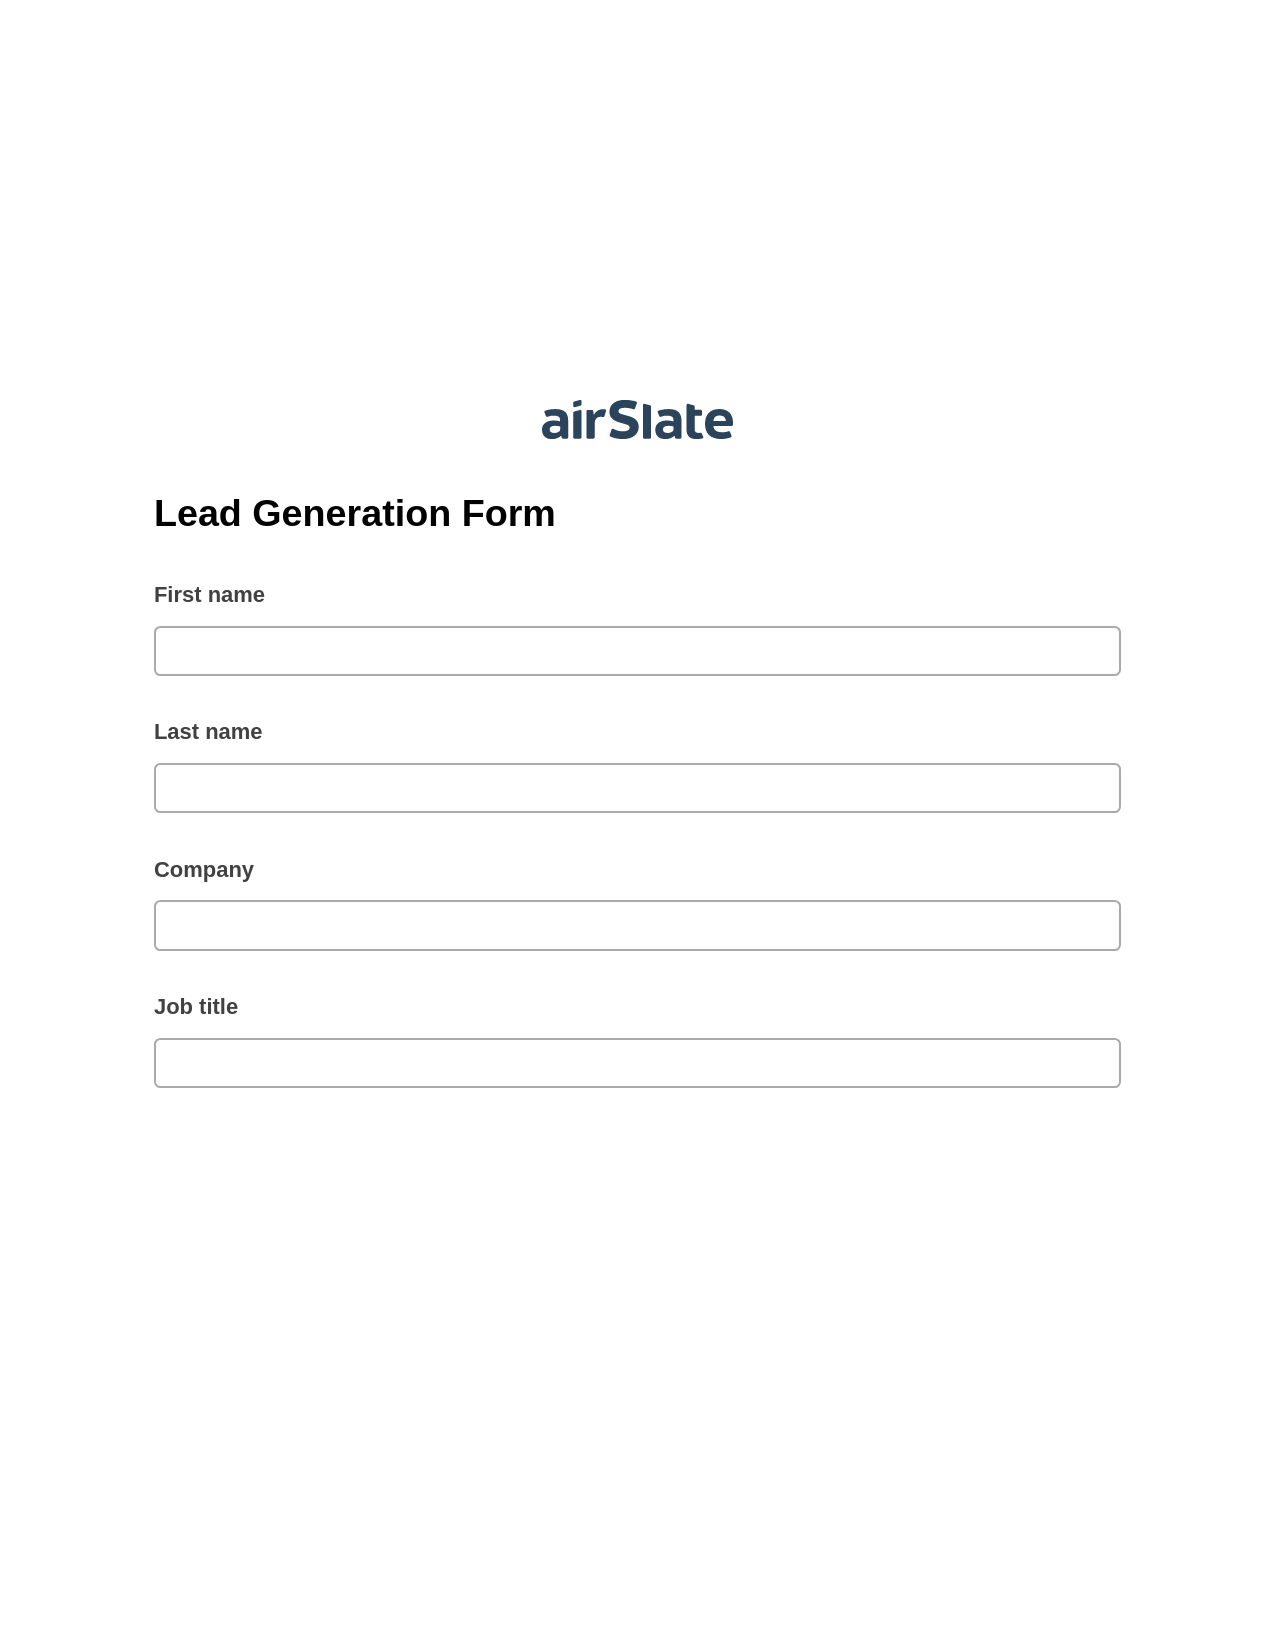 Lead Generation Form Pre-fill from another Slate Bot, Roles Reminder Bot, Archive to Google Drive Bot